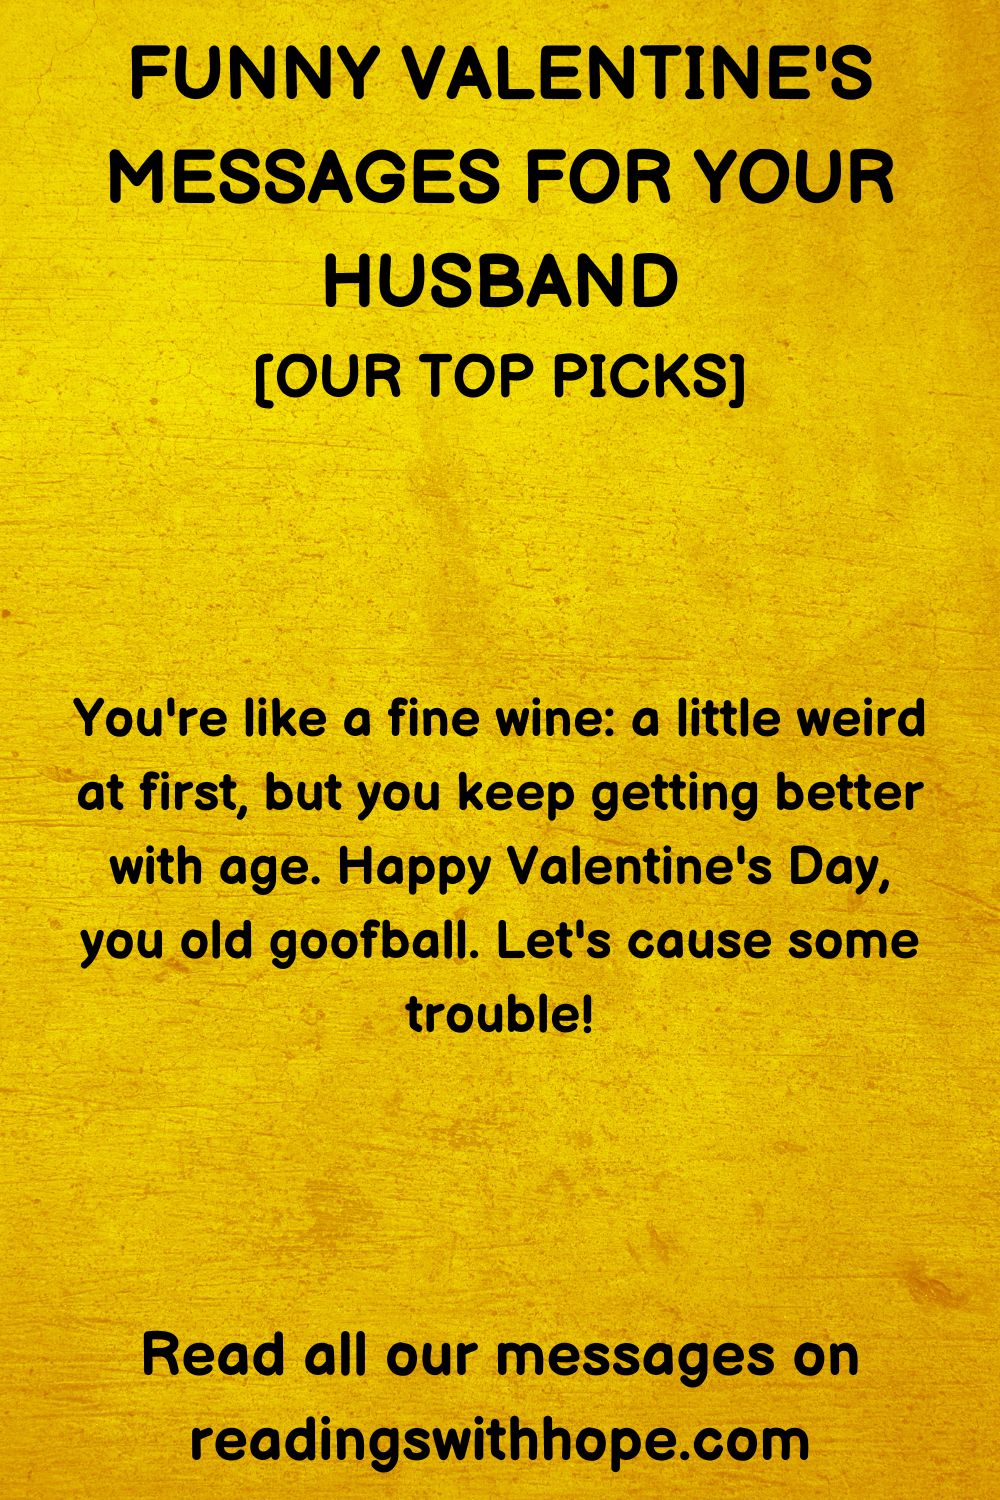 Funny Valentine's Day Message for your Husband